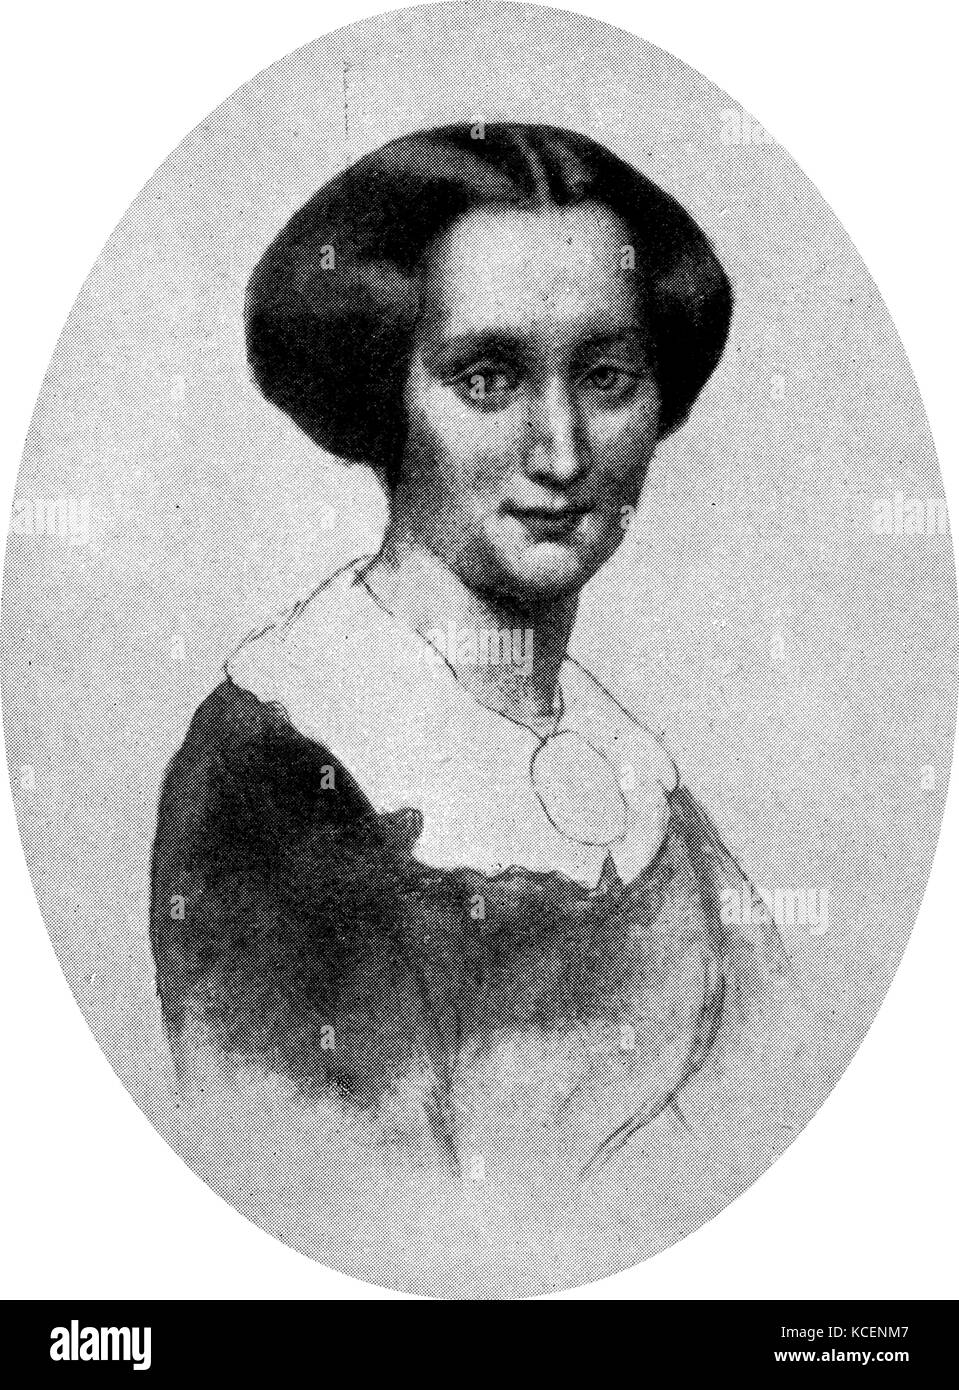 Portrait of Mathilde Wesendonck (1828-1902) a German poet and author. Dated 19th Century Stock Photo